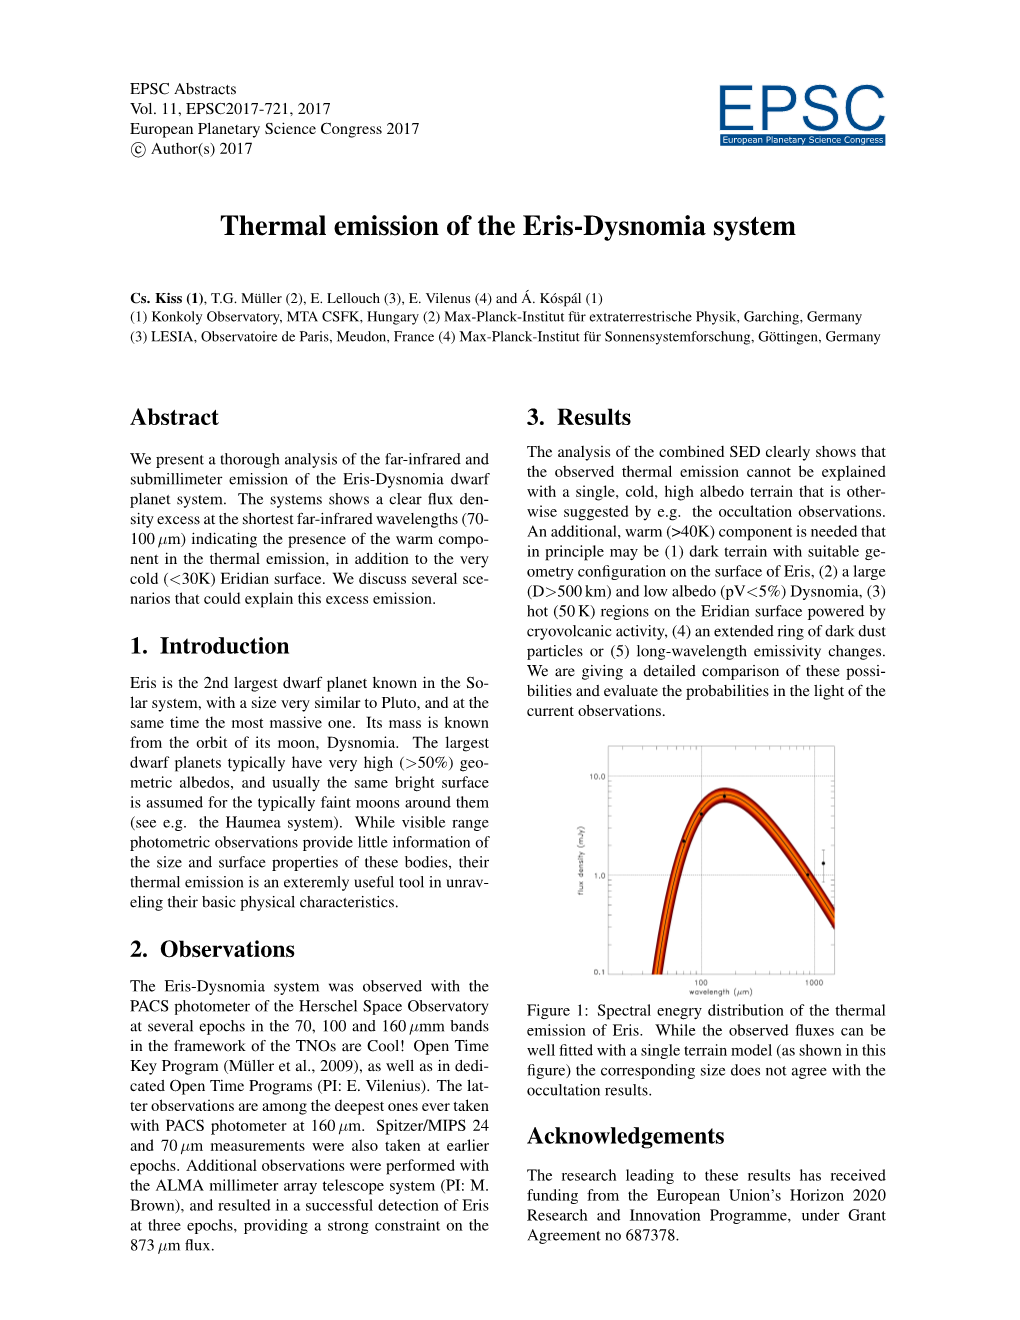 Thermal Emission of the Eris-Dysnomia System